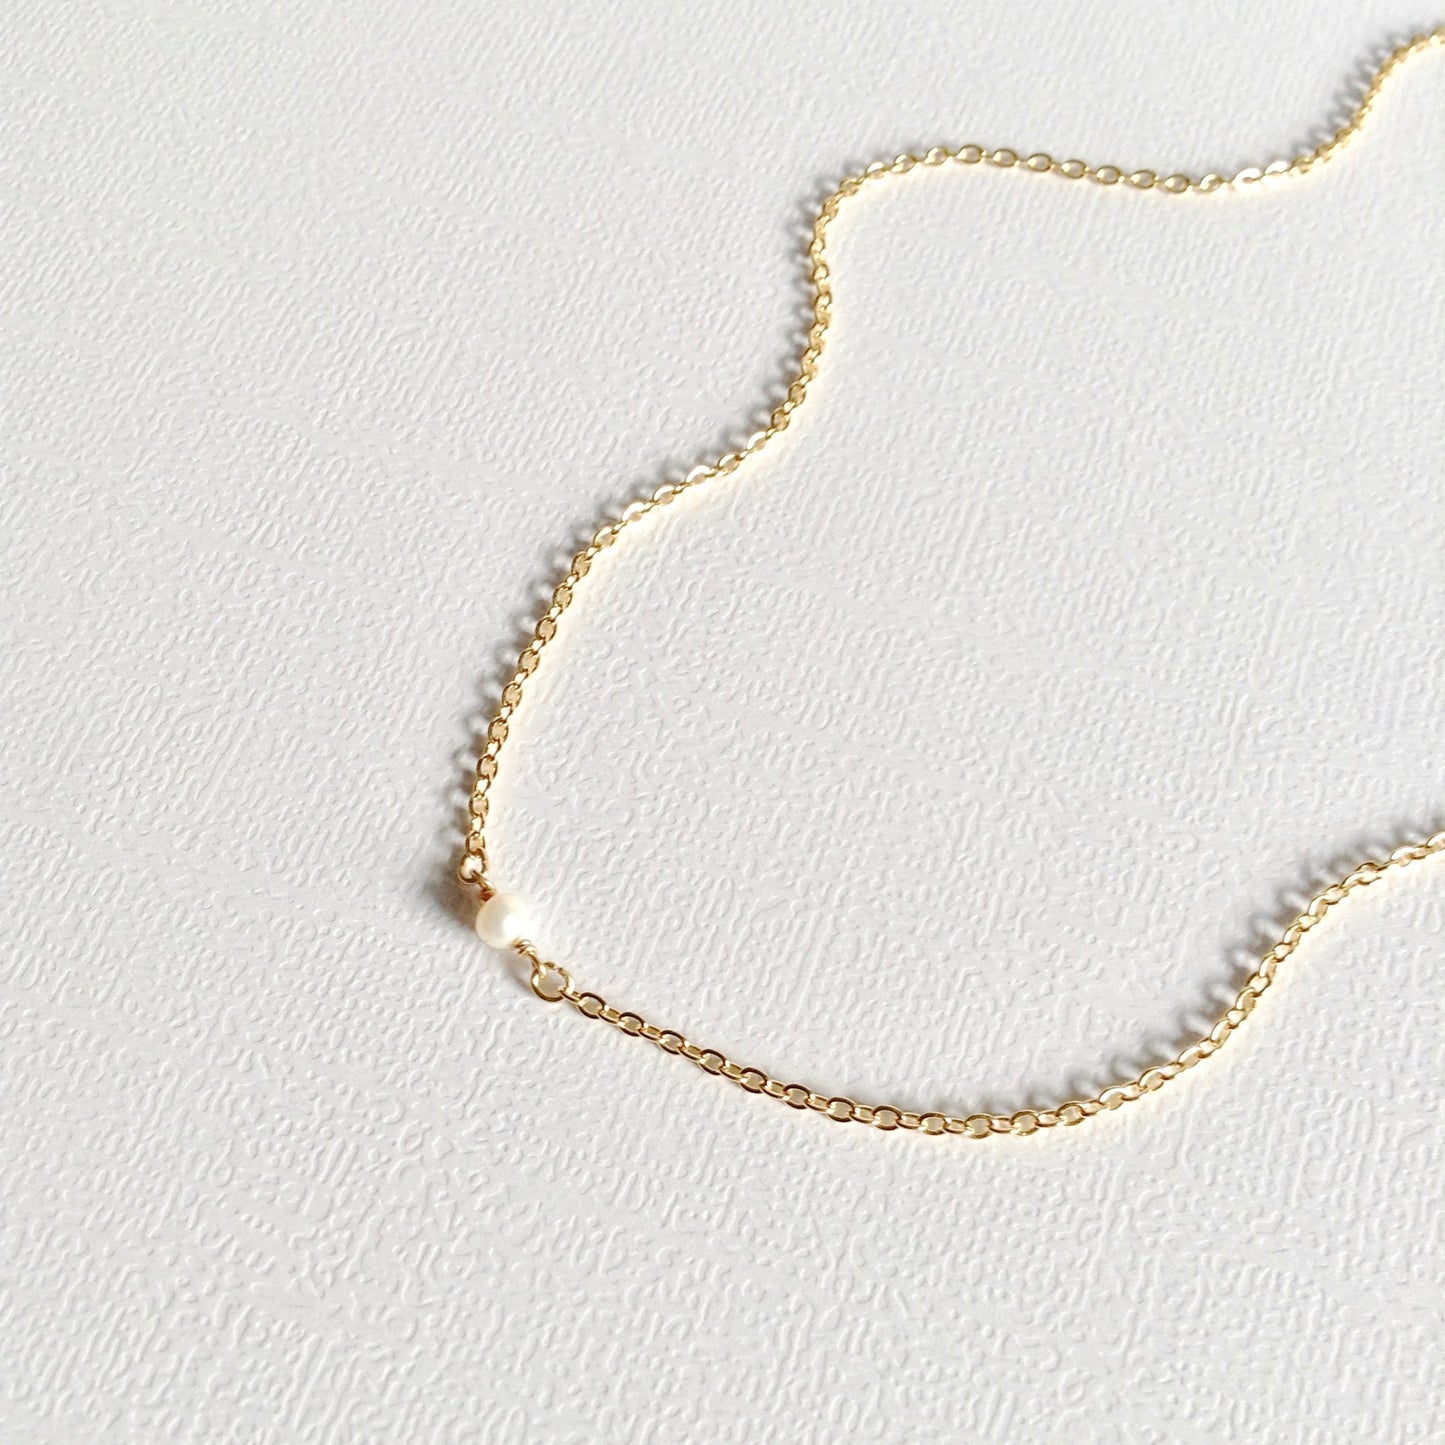 Sister Gift Tiny Single Pearl Necklace | Meaningful Necklace | IB Jewelry